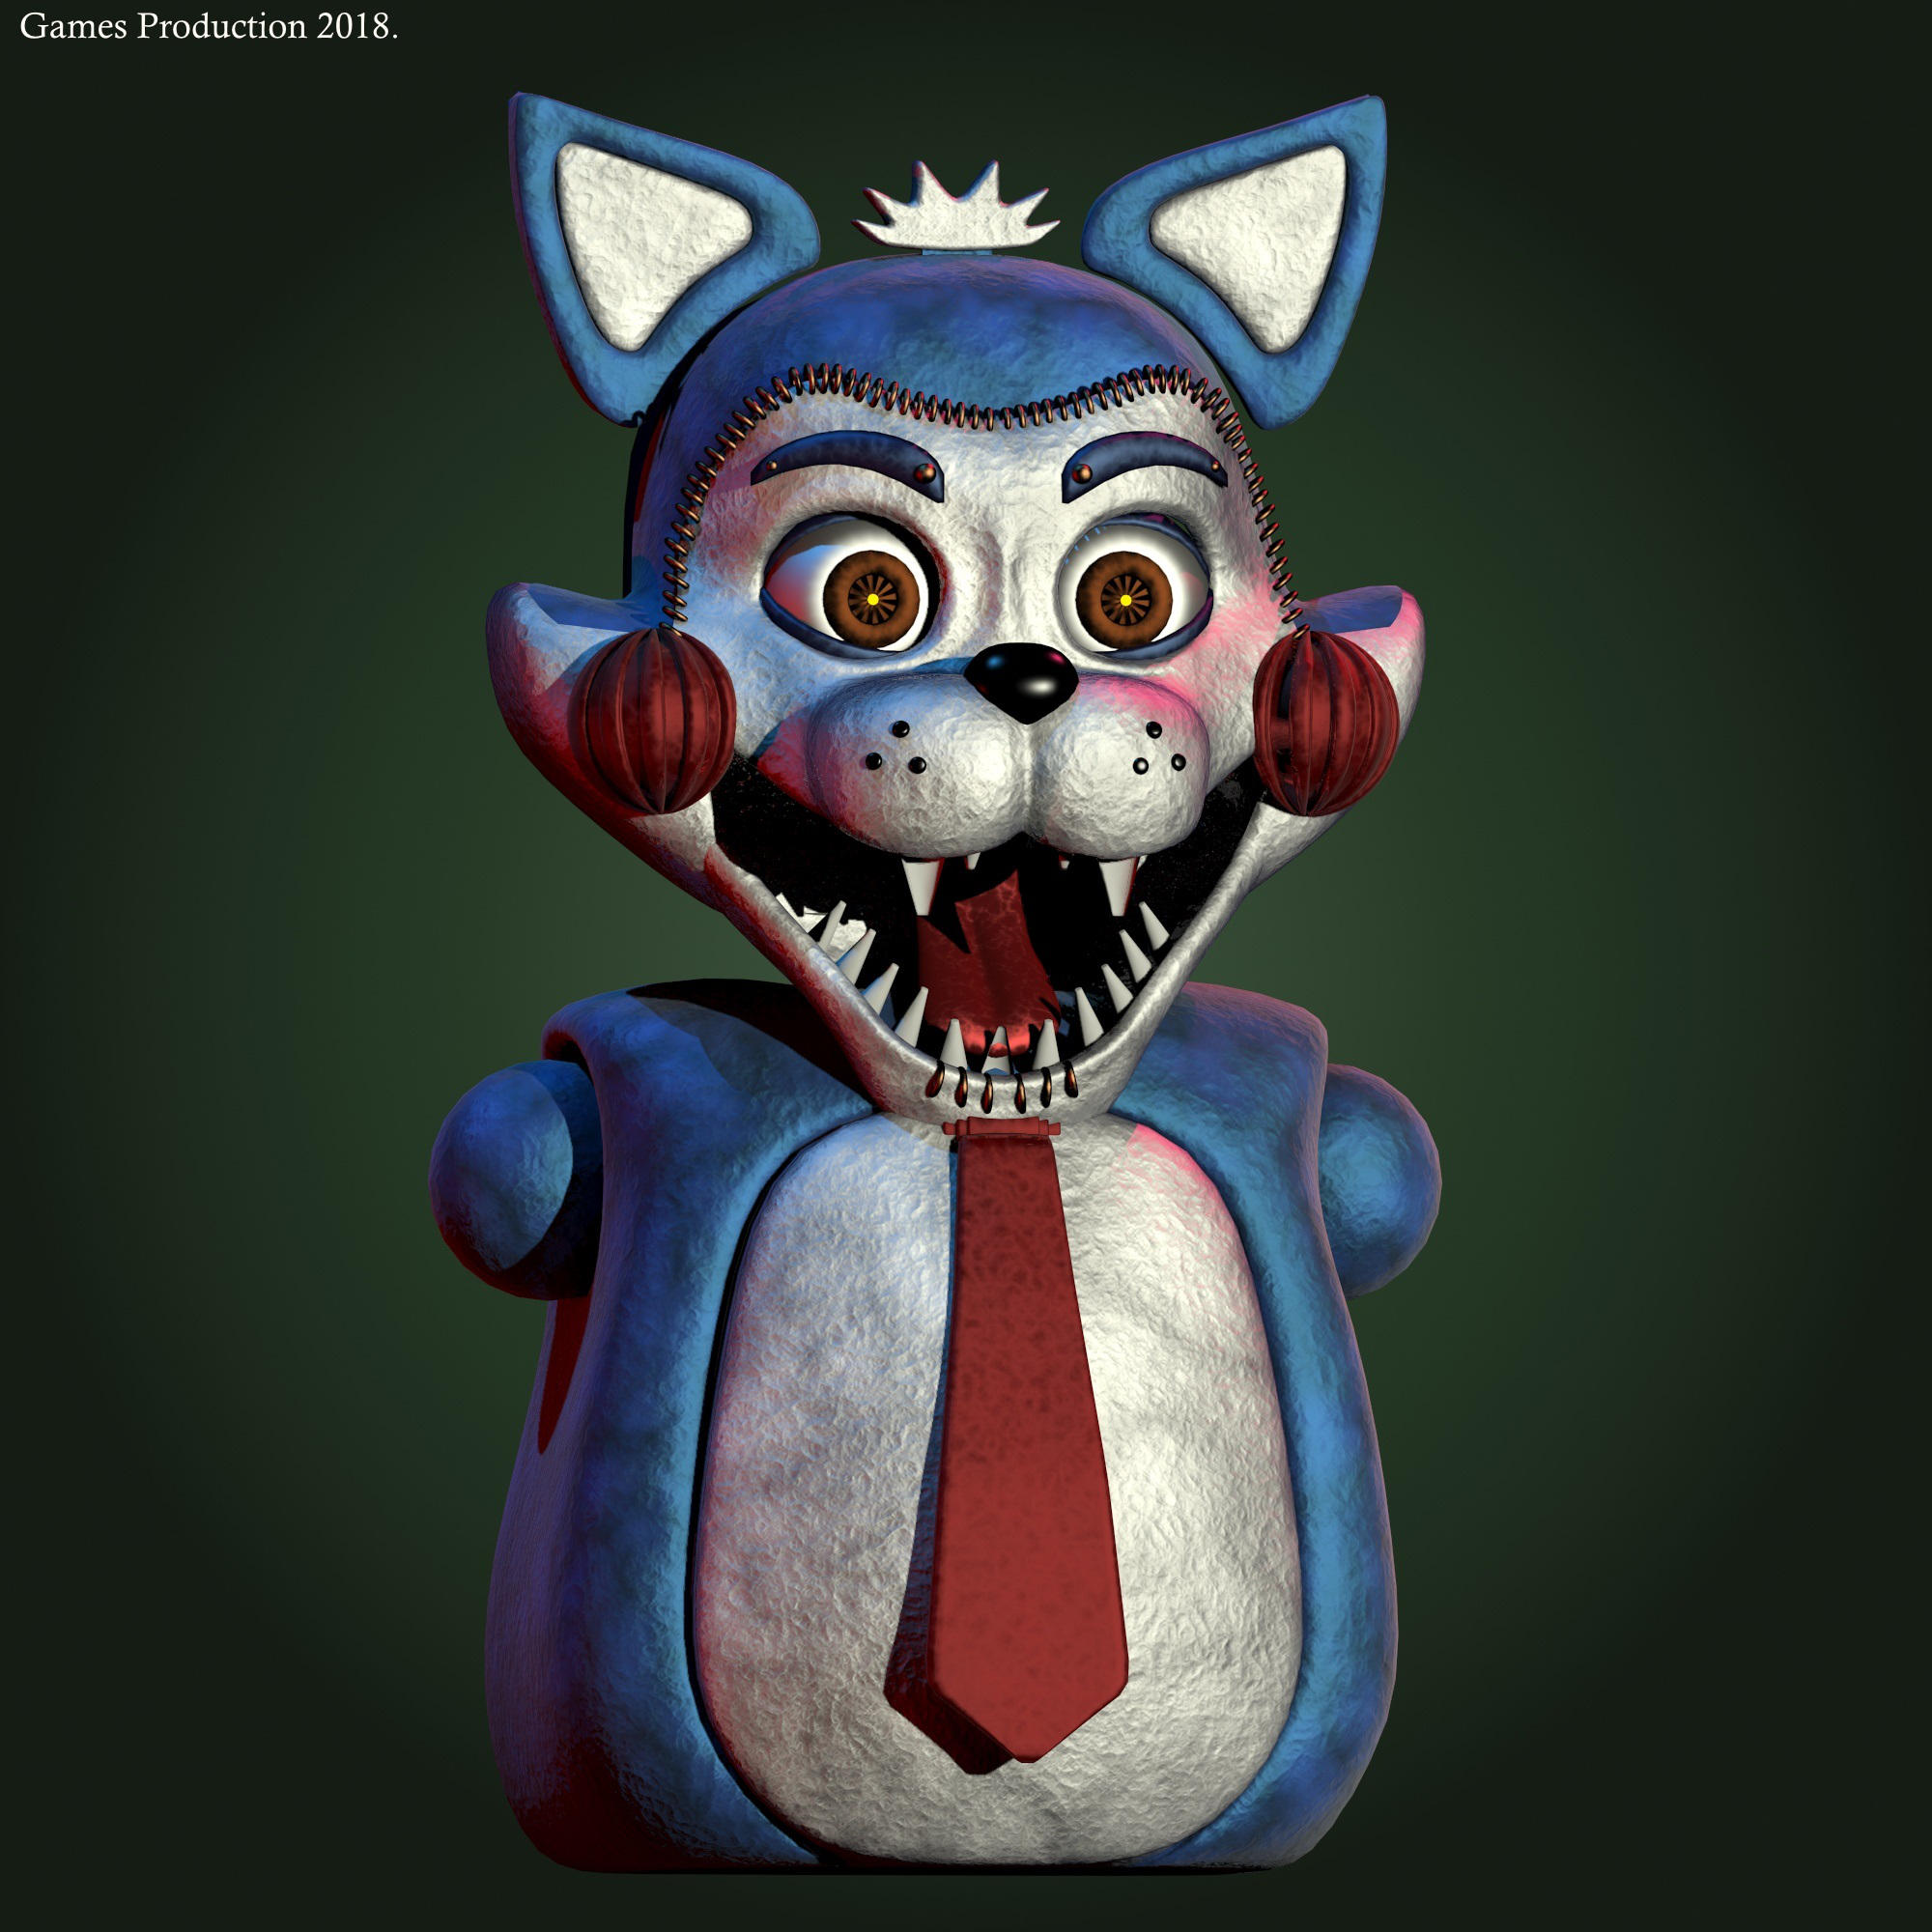  FNAC 4  Candy the Cat WIP Unofficial by GamesProduction 